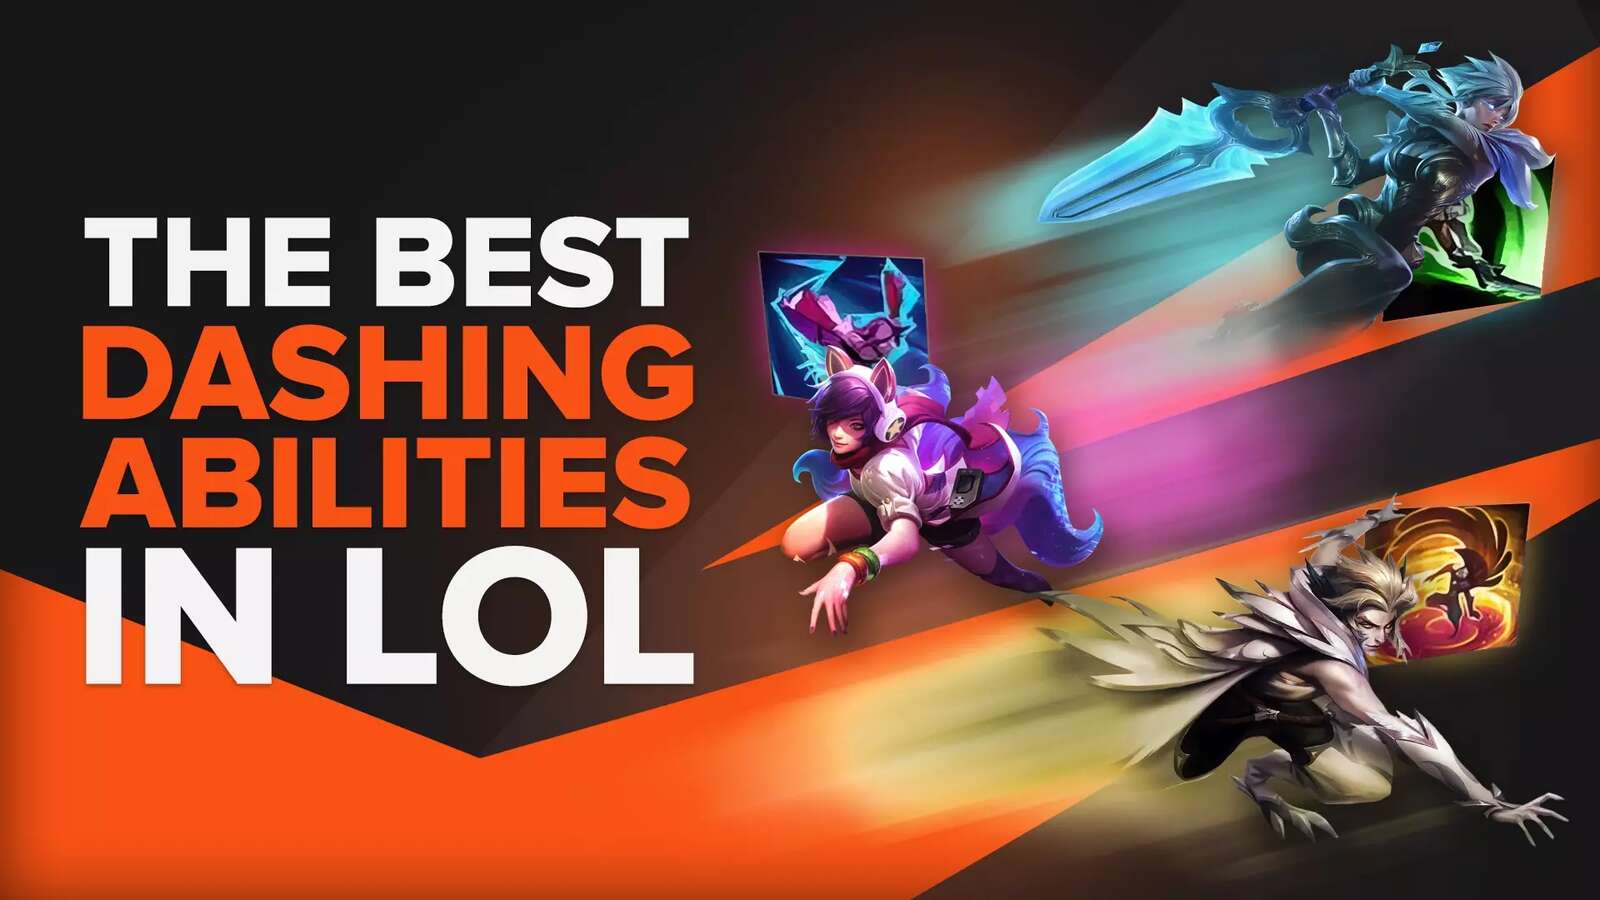 10 Best Dashing Abilities in LoL for Quick Movement